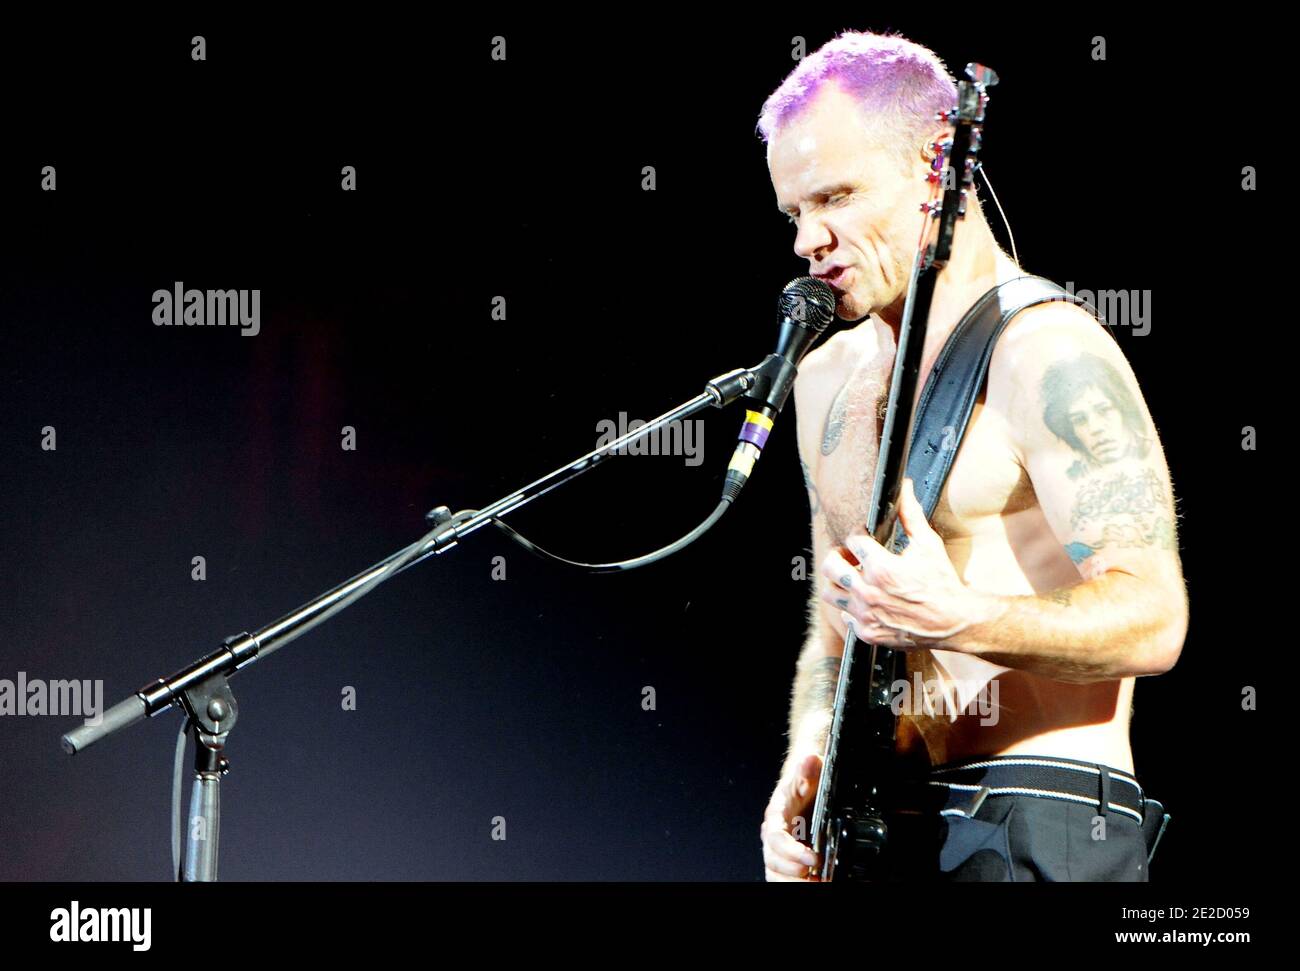 Bass player Flea, whose real name is Michael Peter Balzary, of the Red Hot Chili Peppers performs at the Paris-Bercy Concert Hall in Paris, France, October 18, 2011. Photo by ABACAPRESS.COM Stock Photo